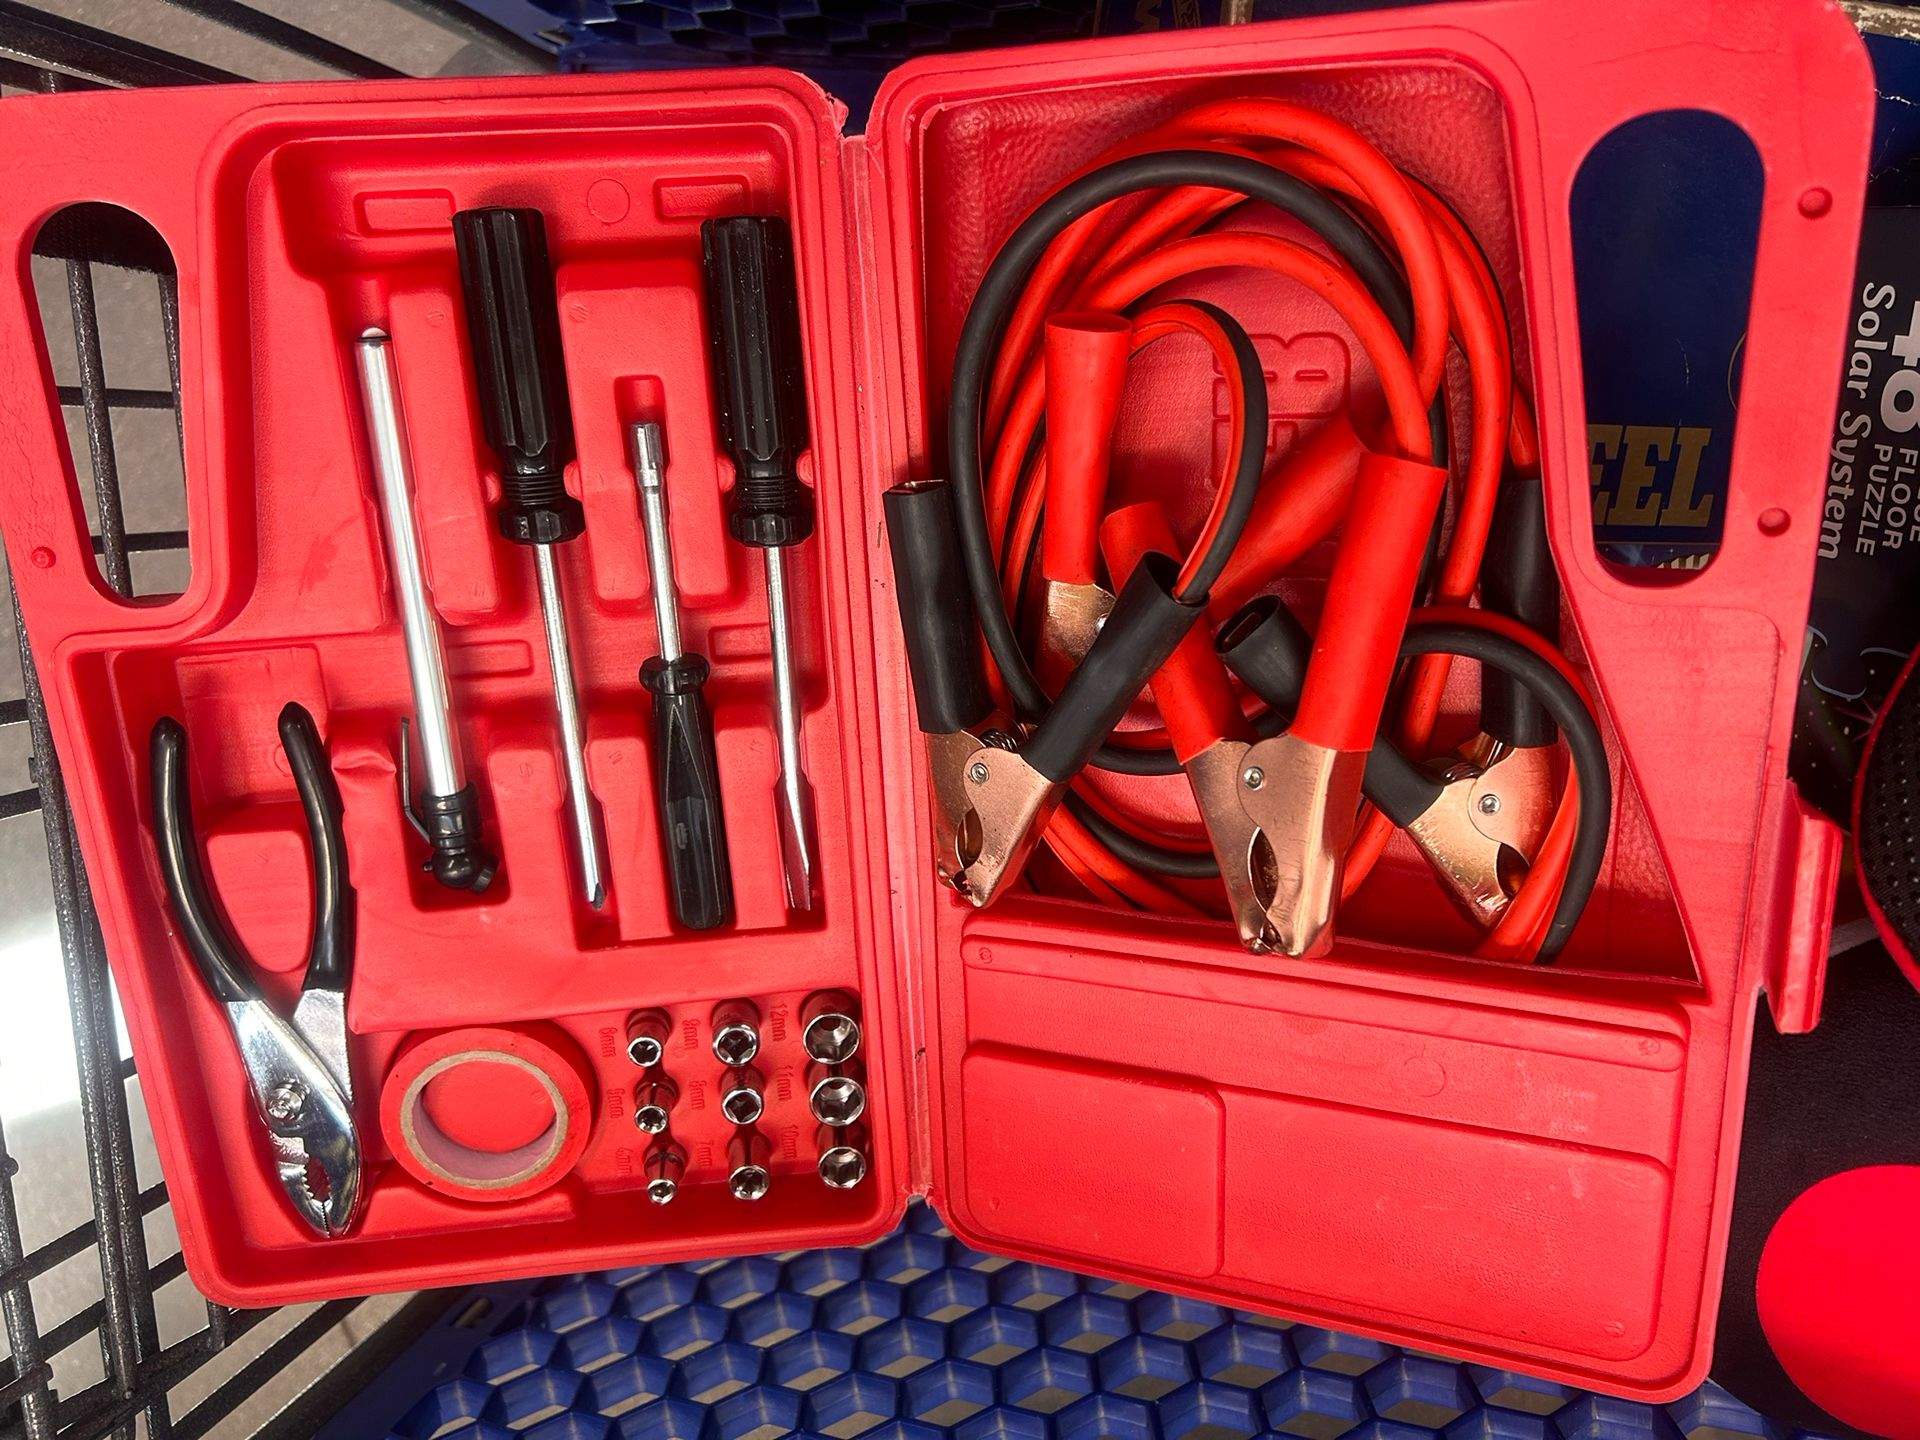 Roadside Assistance Emergency Tool Kit For Car, Jumper Cables For Auto 